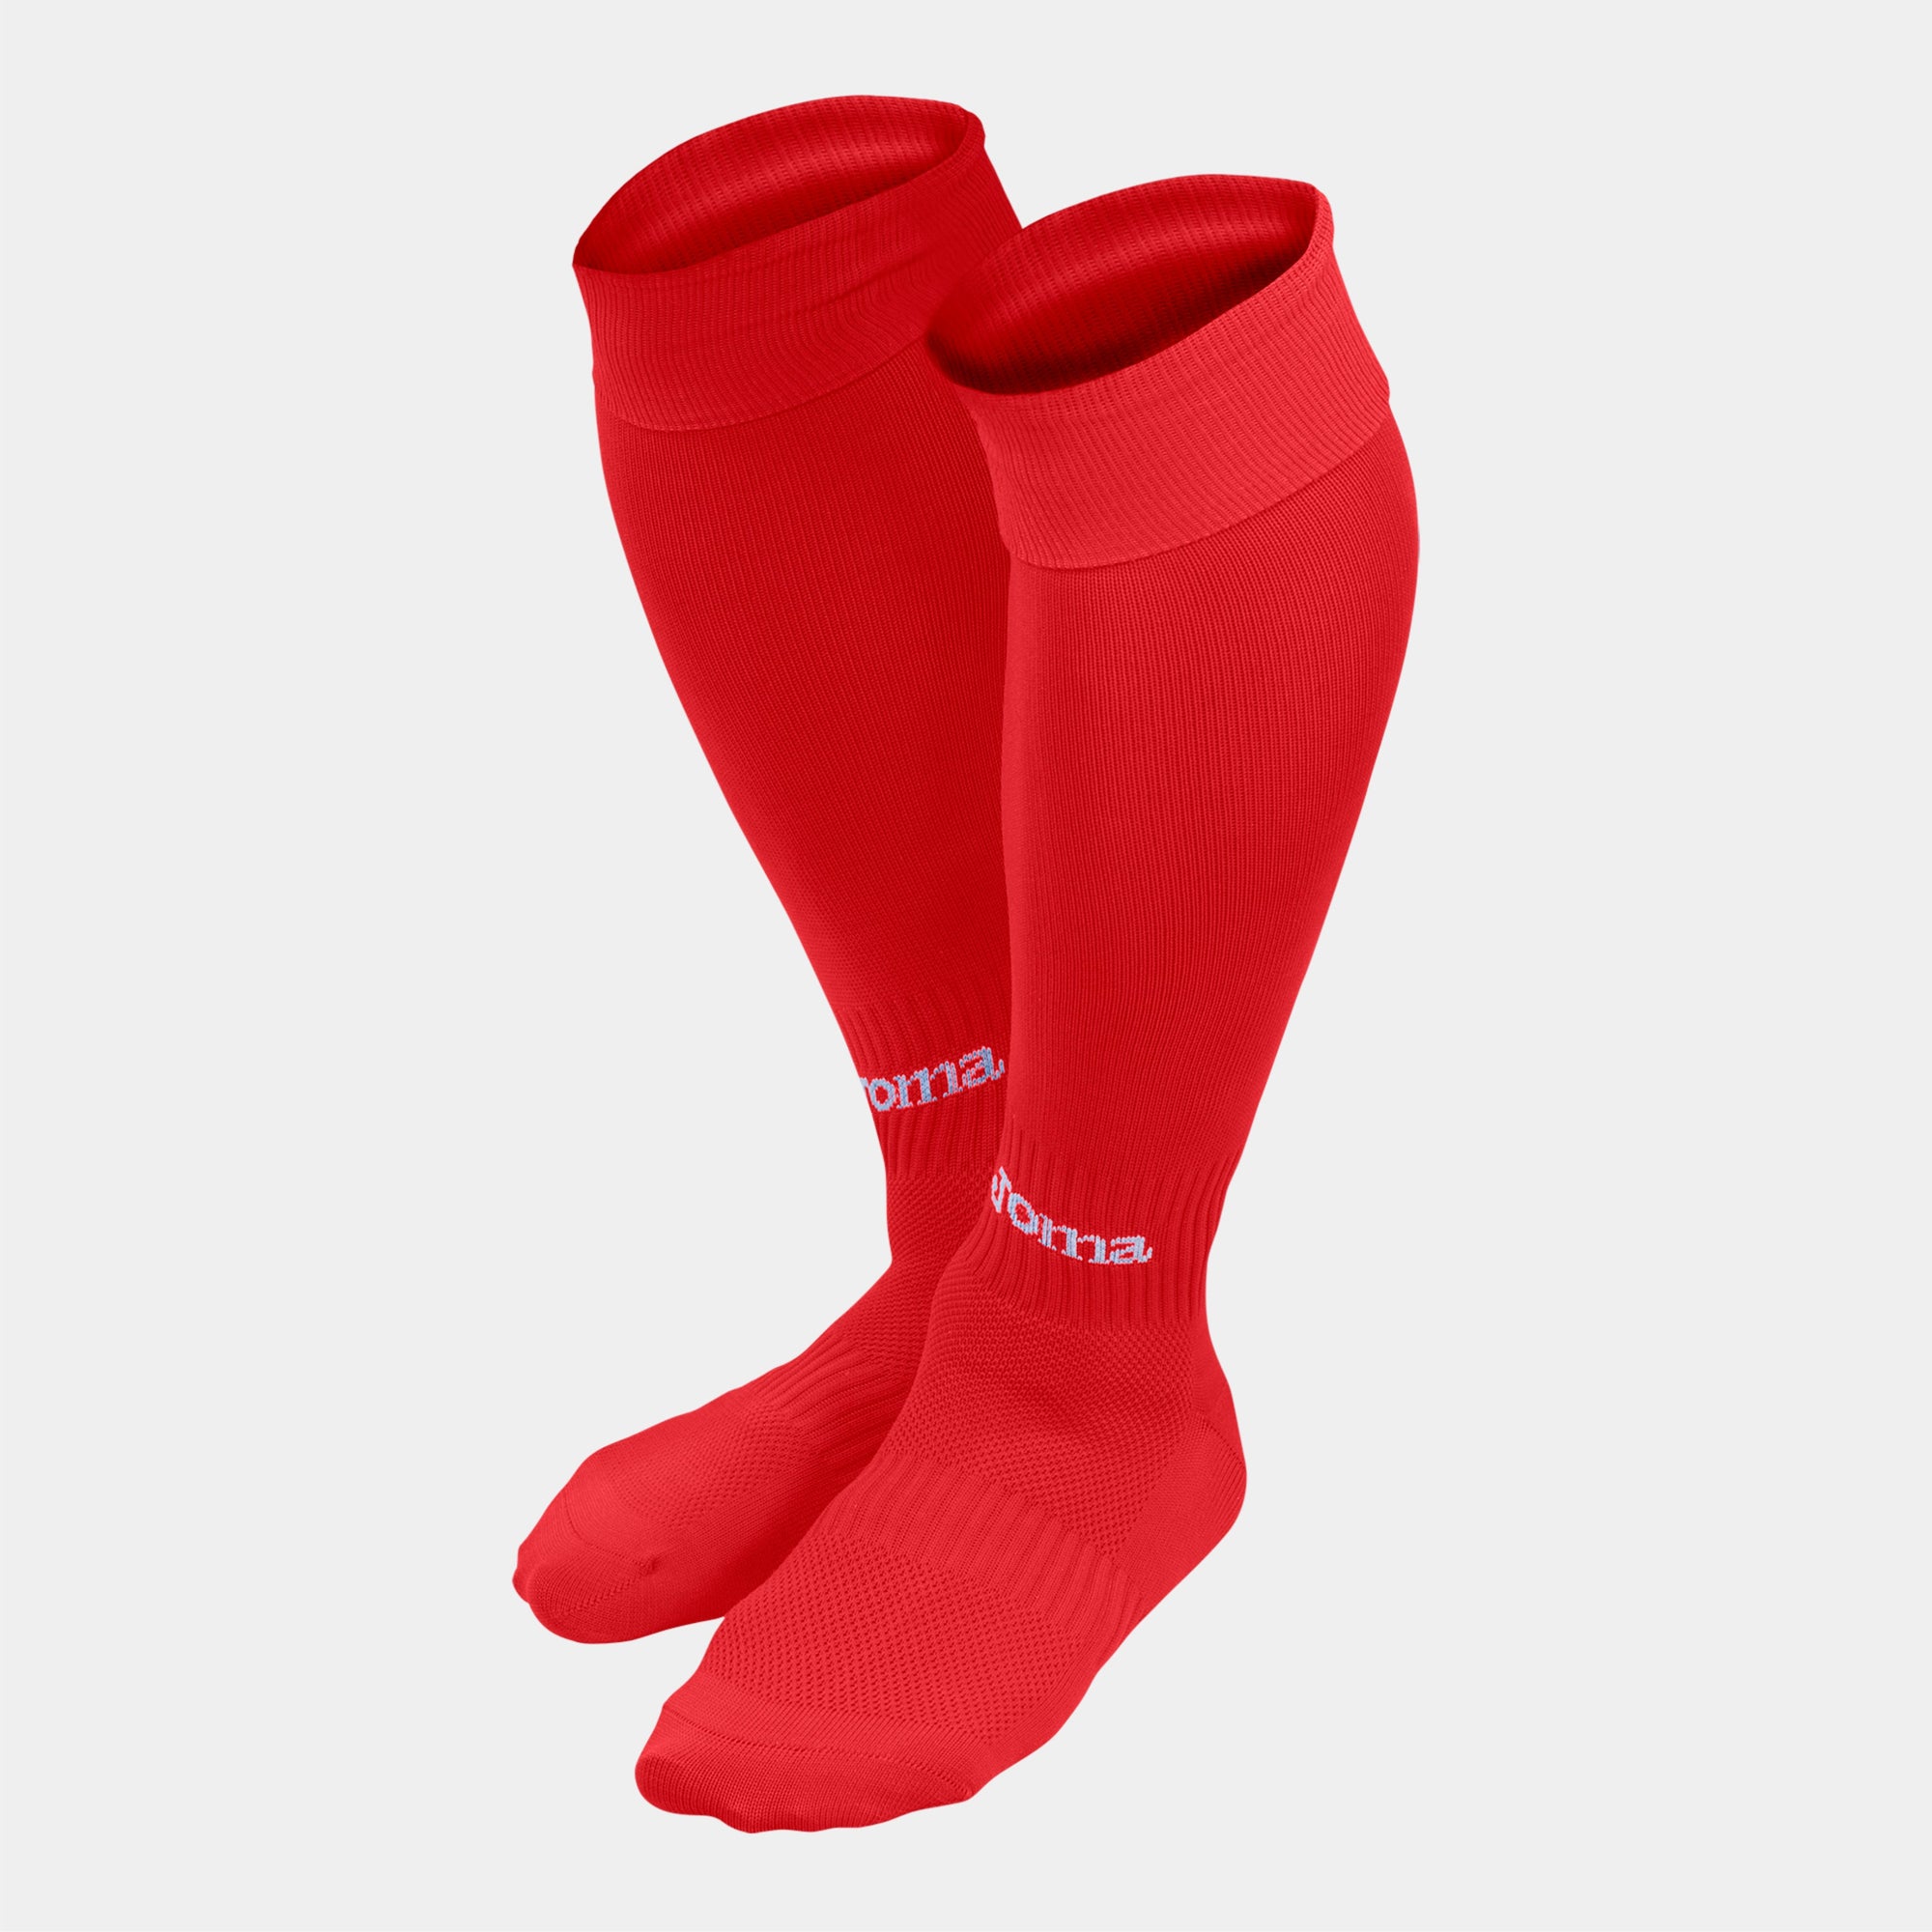 Lyminton Town - Joma Classic 2 Sock - Red